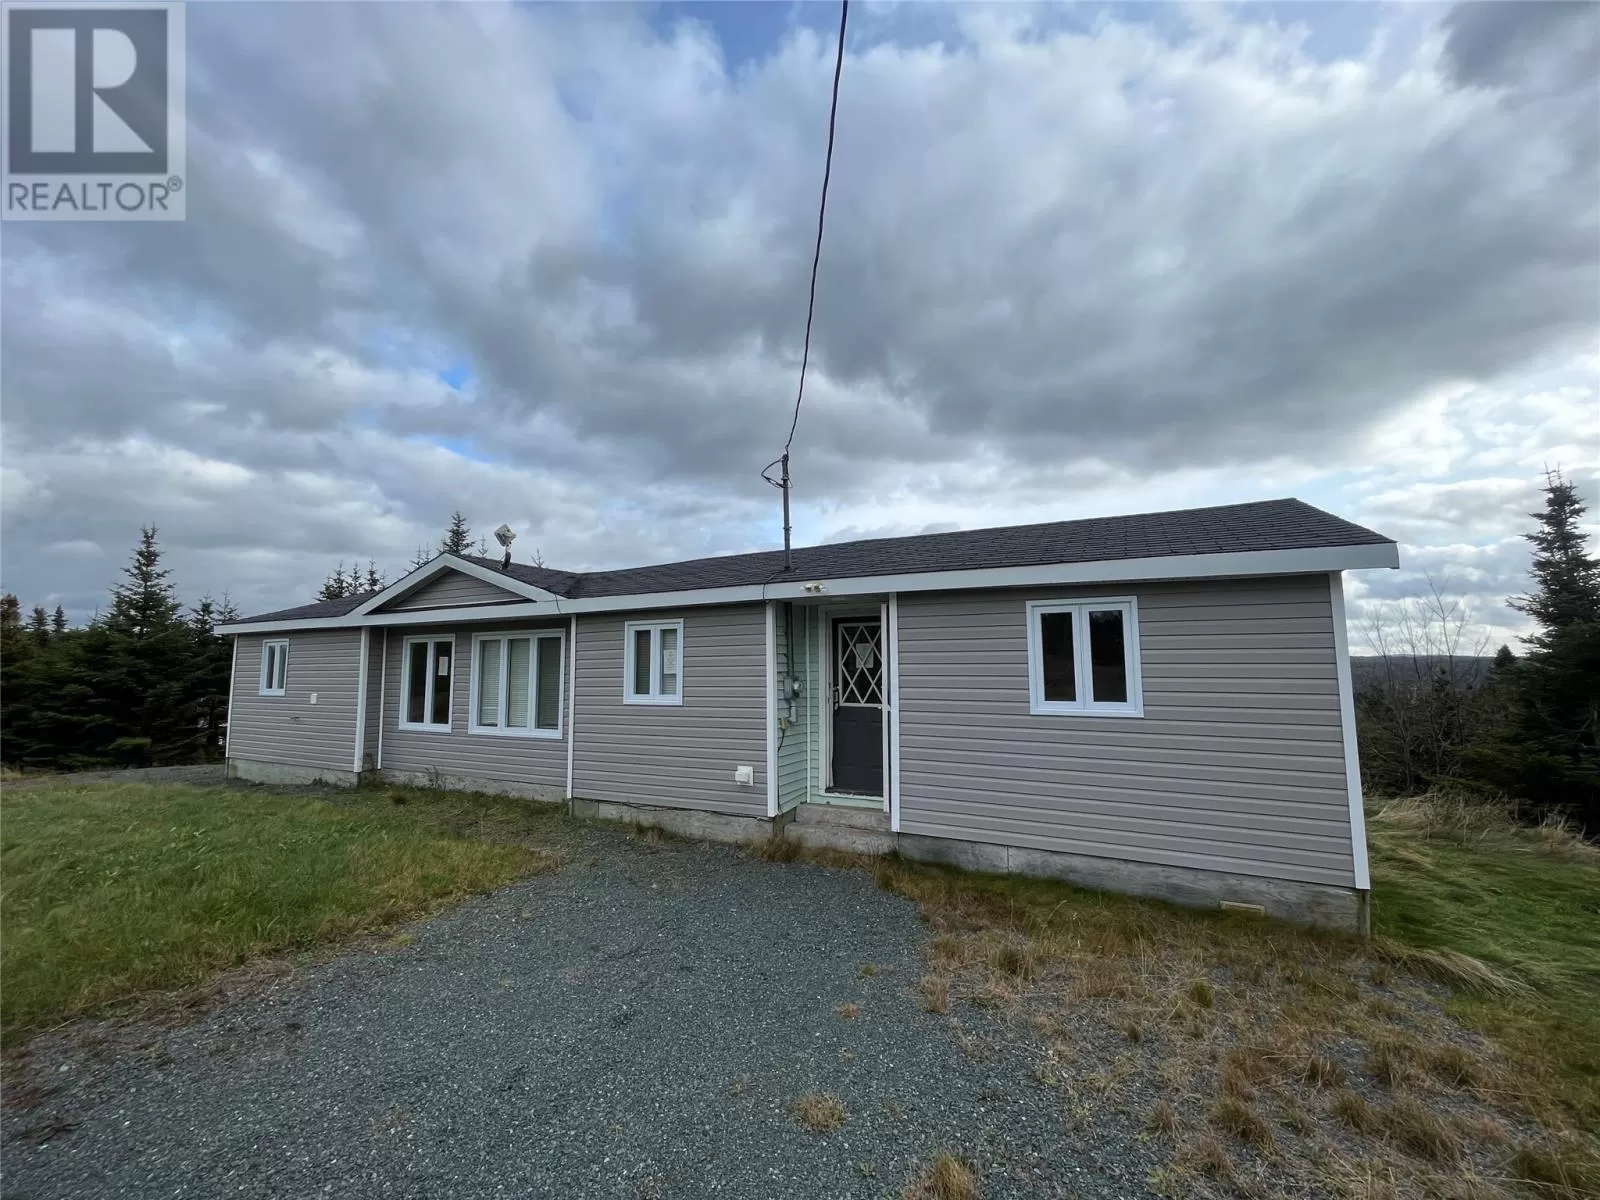 House for rent: 23 The Wilds Extension, Holyrood, Newfoundland & Labrador A0A 2R0